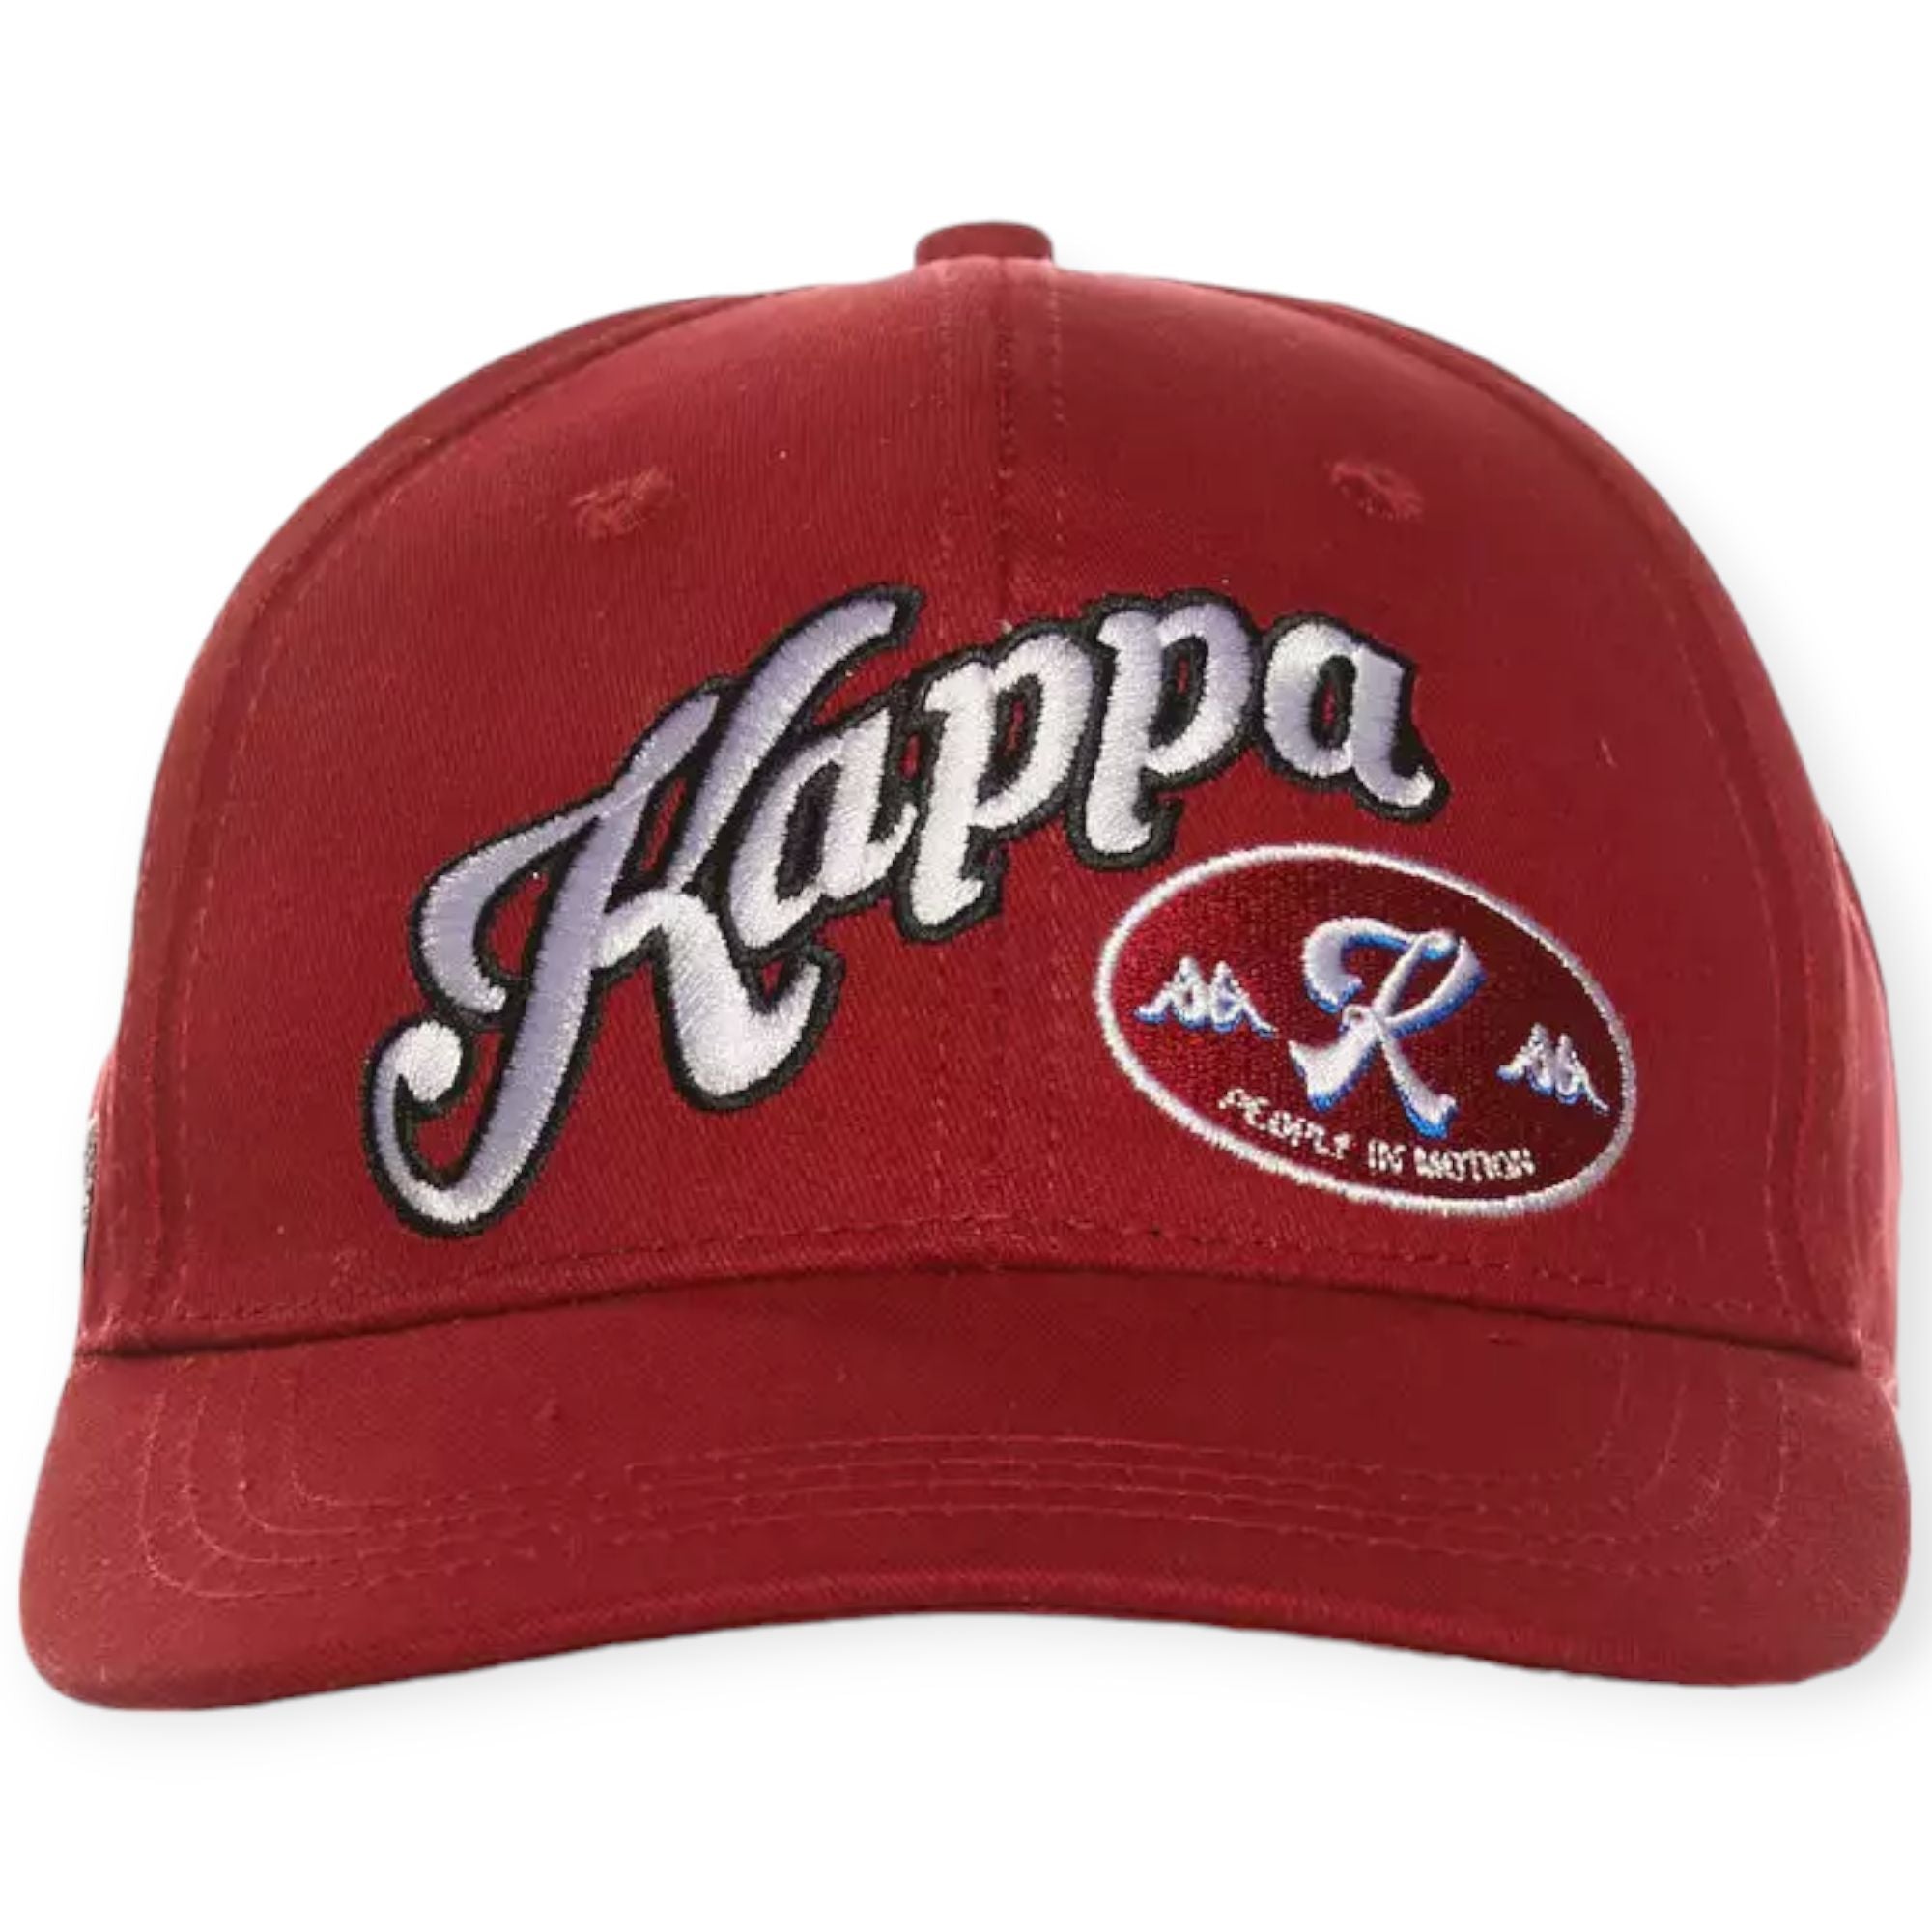 Kappa Men Authentic Rakes Cap (RED CHILY PEPPER)-RED CHILY PEPPER-OneSize-Nexus Clothing